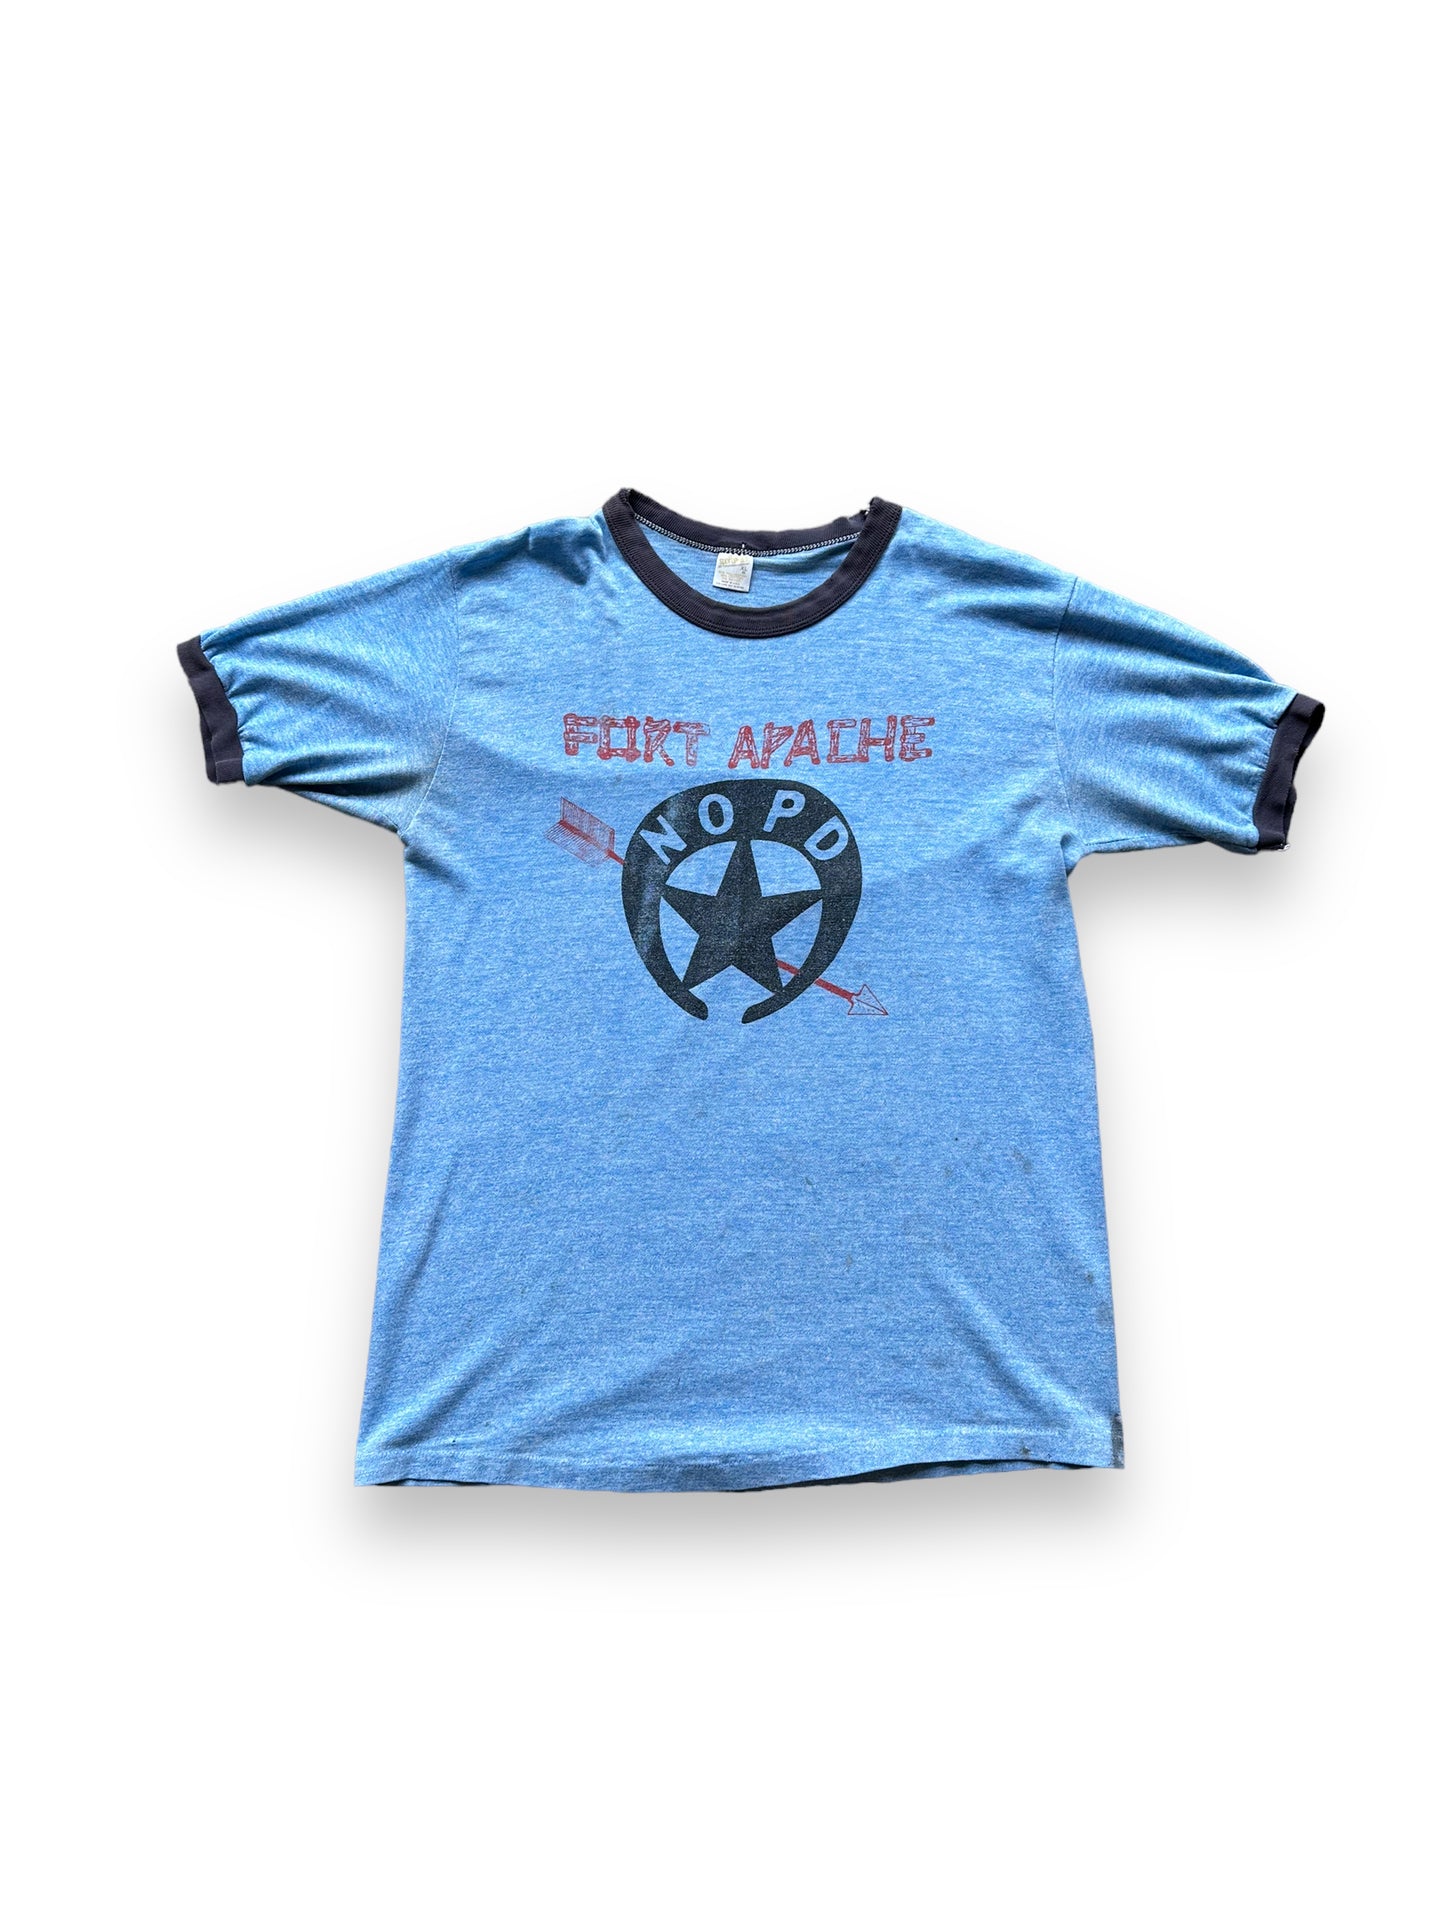 Front of Vintage Fort Apache Ringer Tee SZ XL |  Vintage Ringer Tee Seattle | Barn Owl Vintage